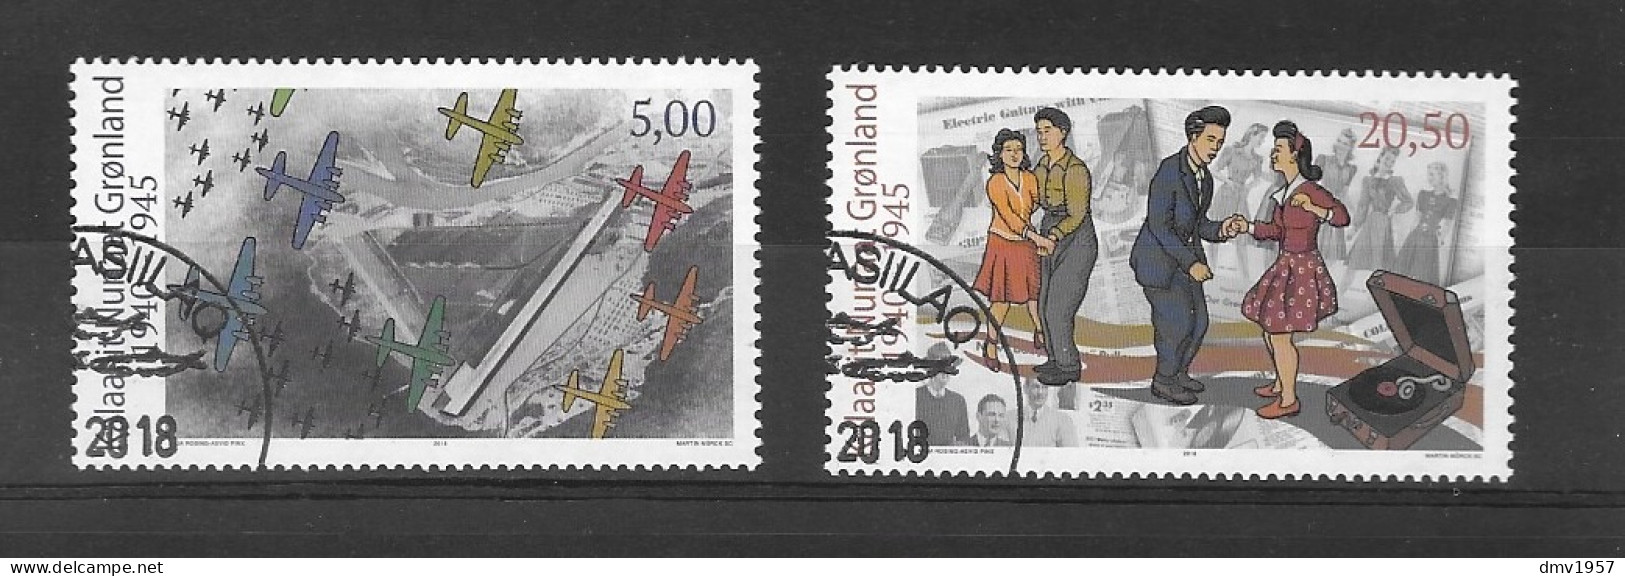 Greenland 2018 CTO Greenland During WWII Sg 885/6 - Used Stamps